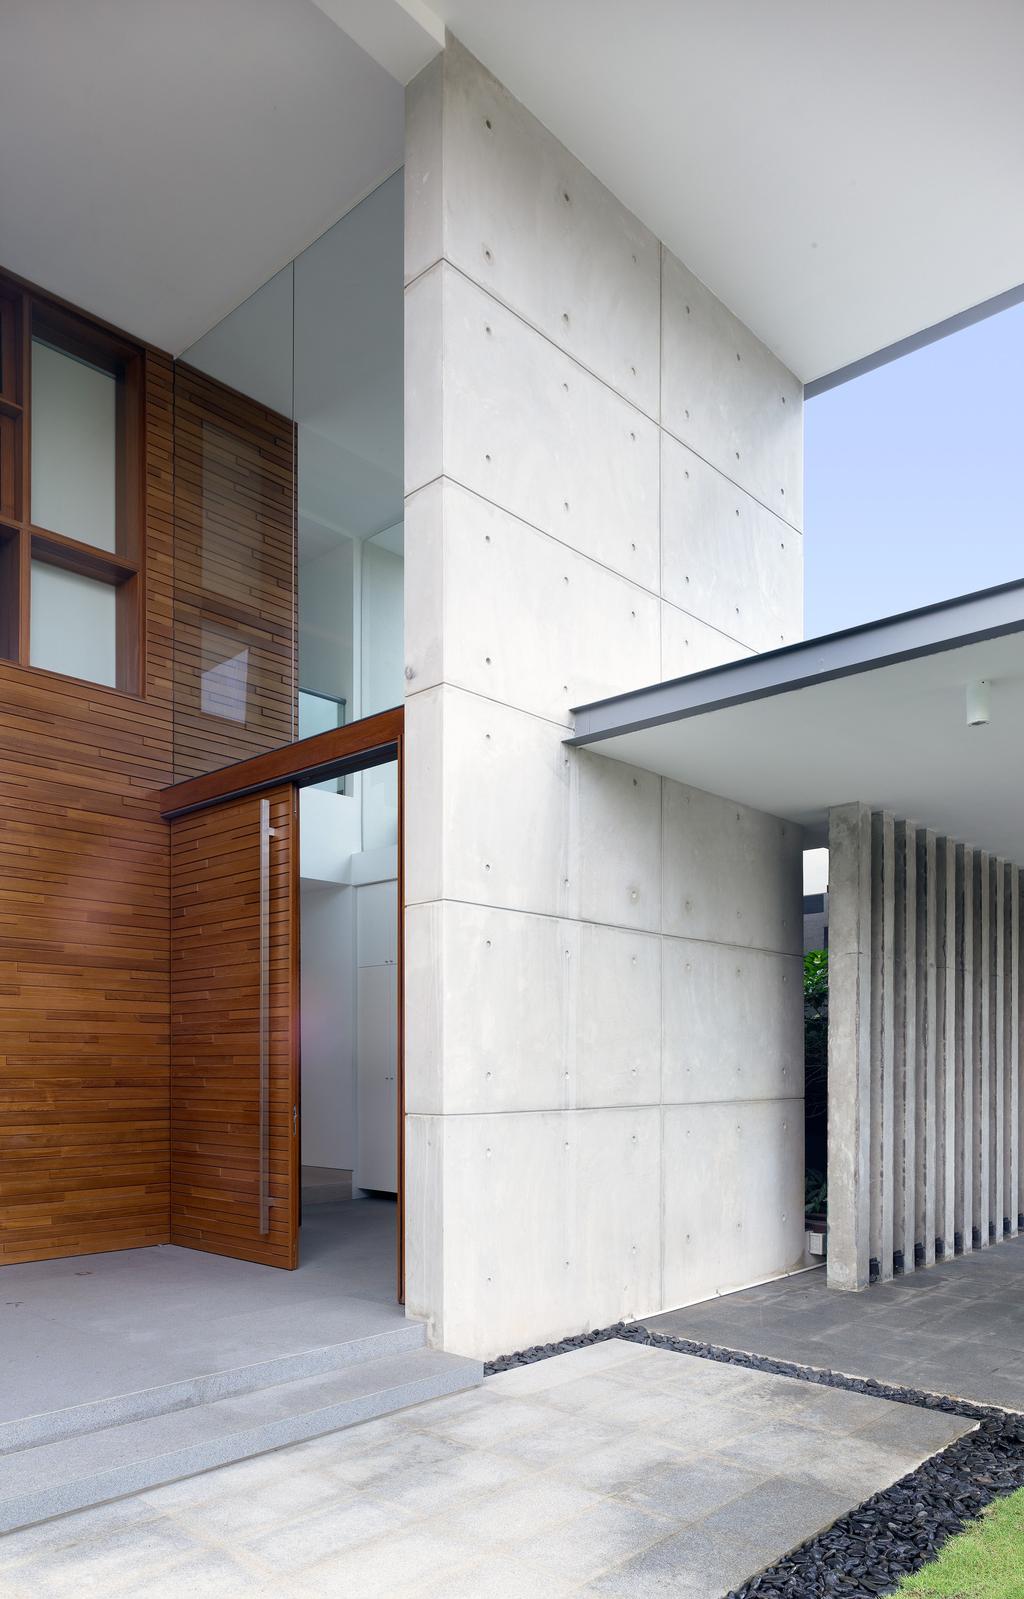 Modern, Landed, Ocean Drive 3, Architect, Greg Shand Architects, High Walls, Wooden Wall, Glass Door, Pebbles Path, Concrete Beams, Concrete Walls